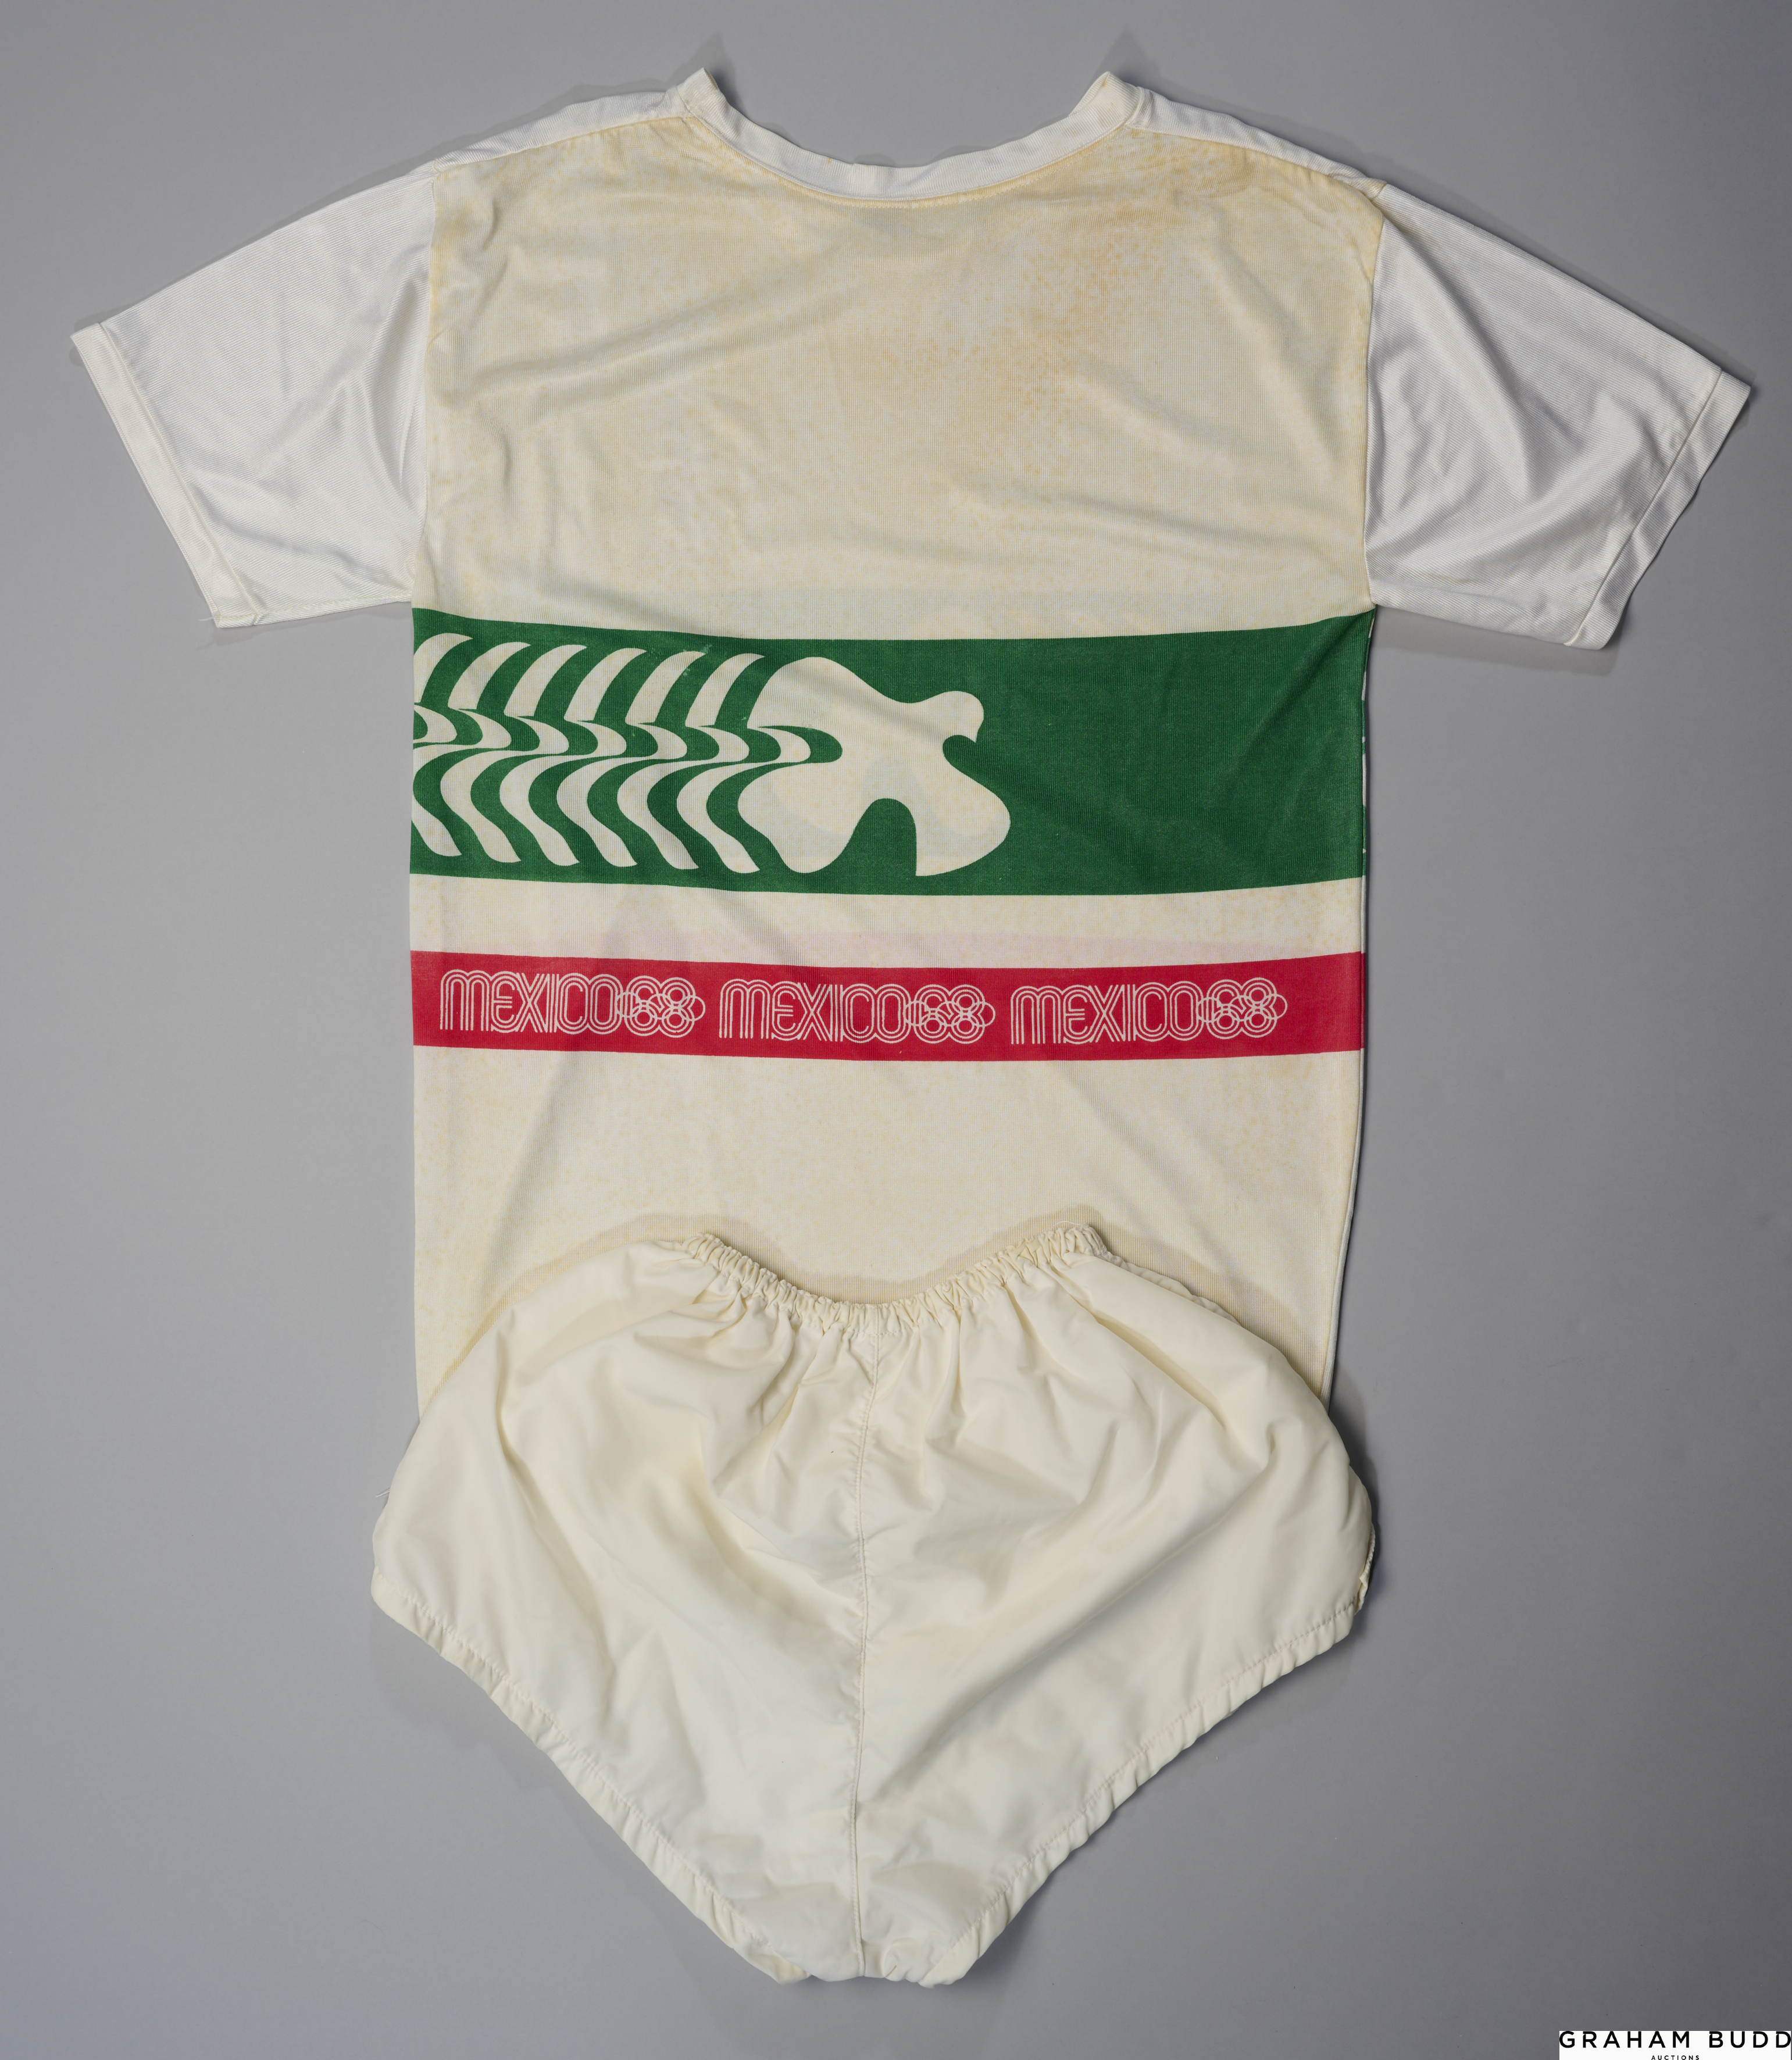 1968 Olympic Games official torch bearers uniform - Image 2 of 2